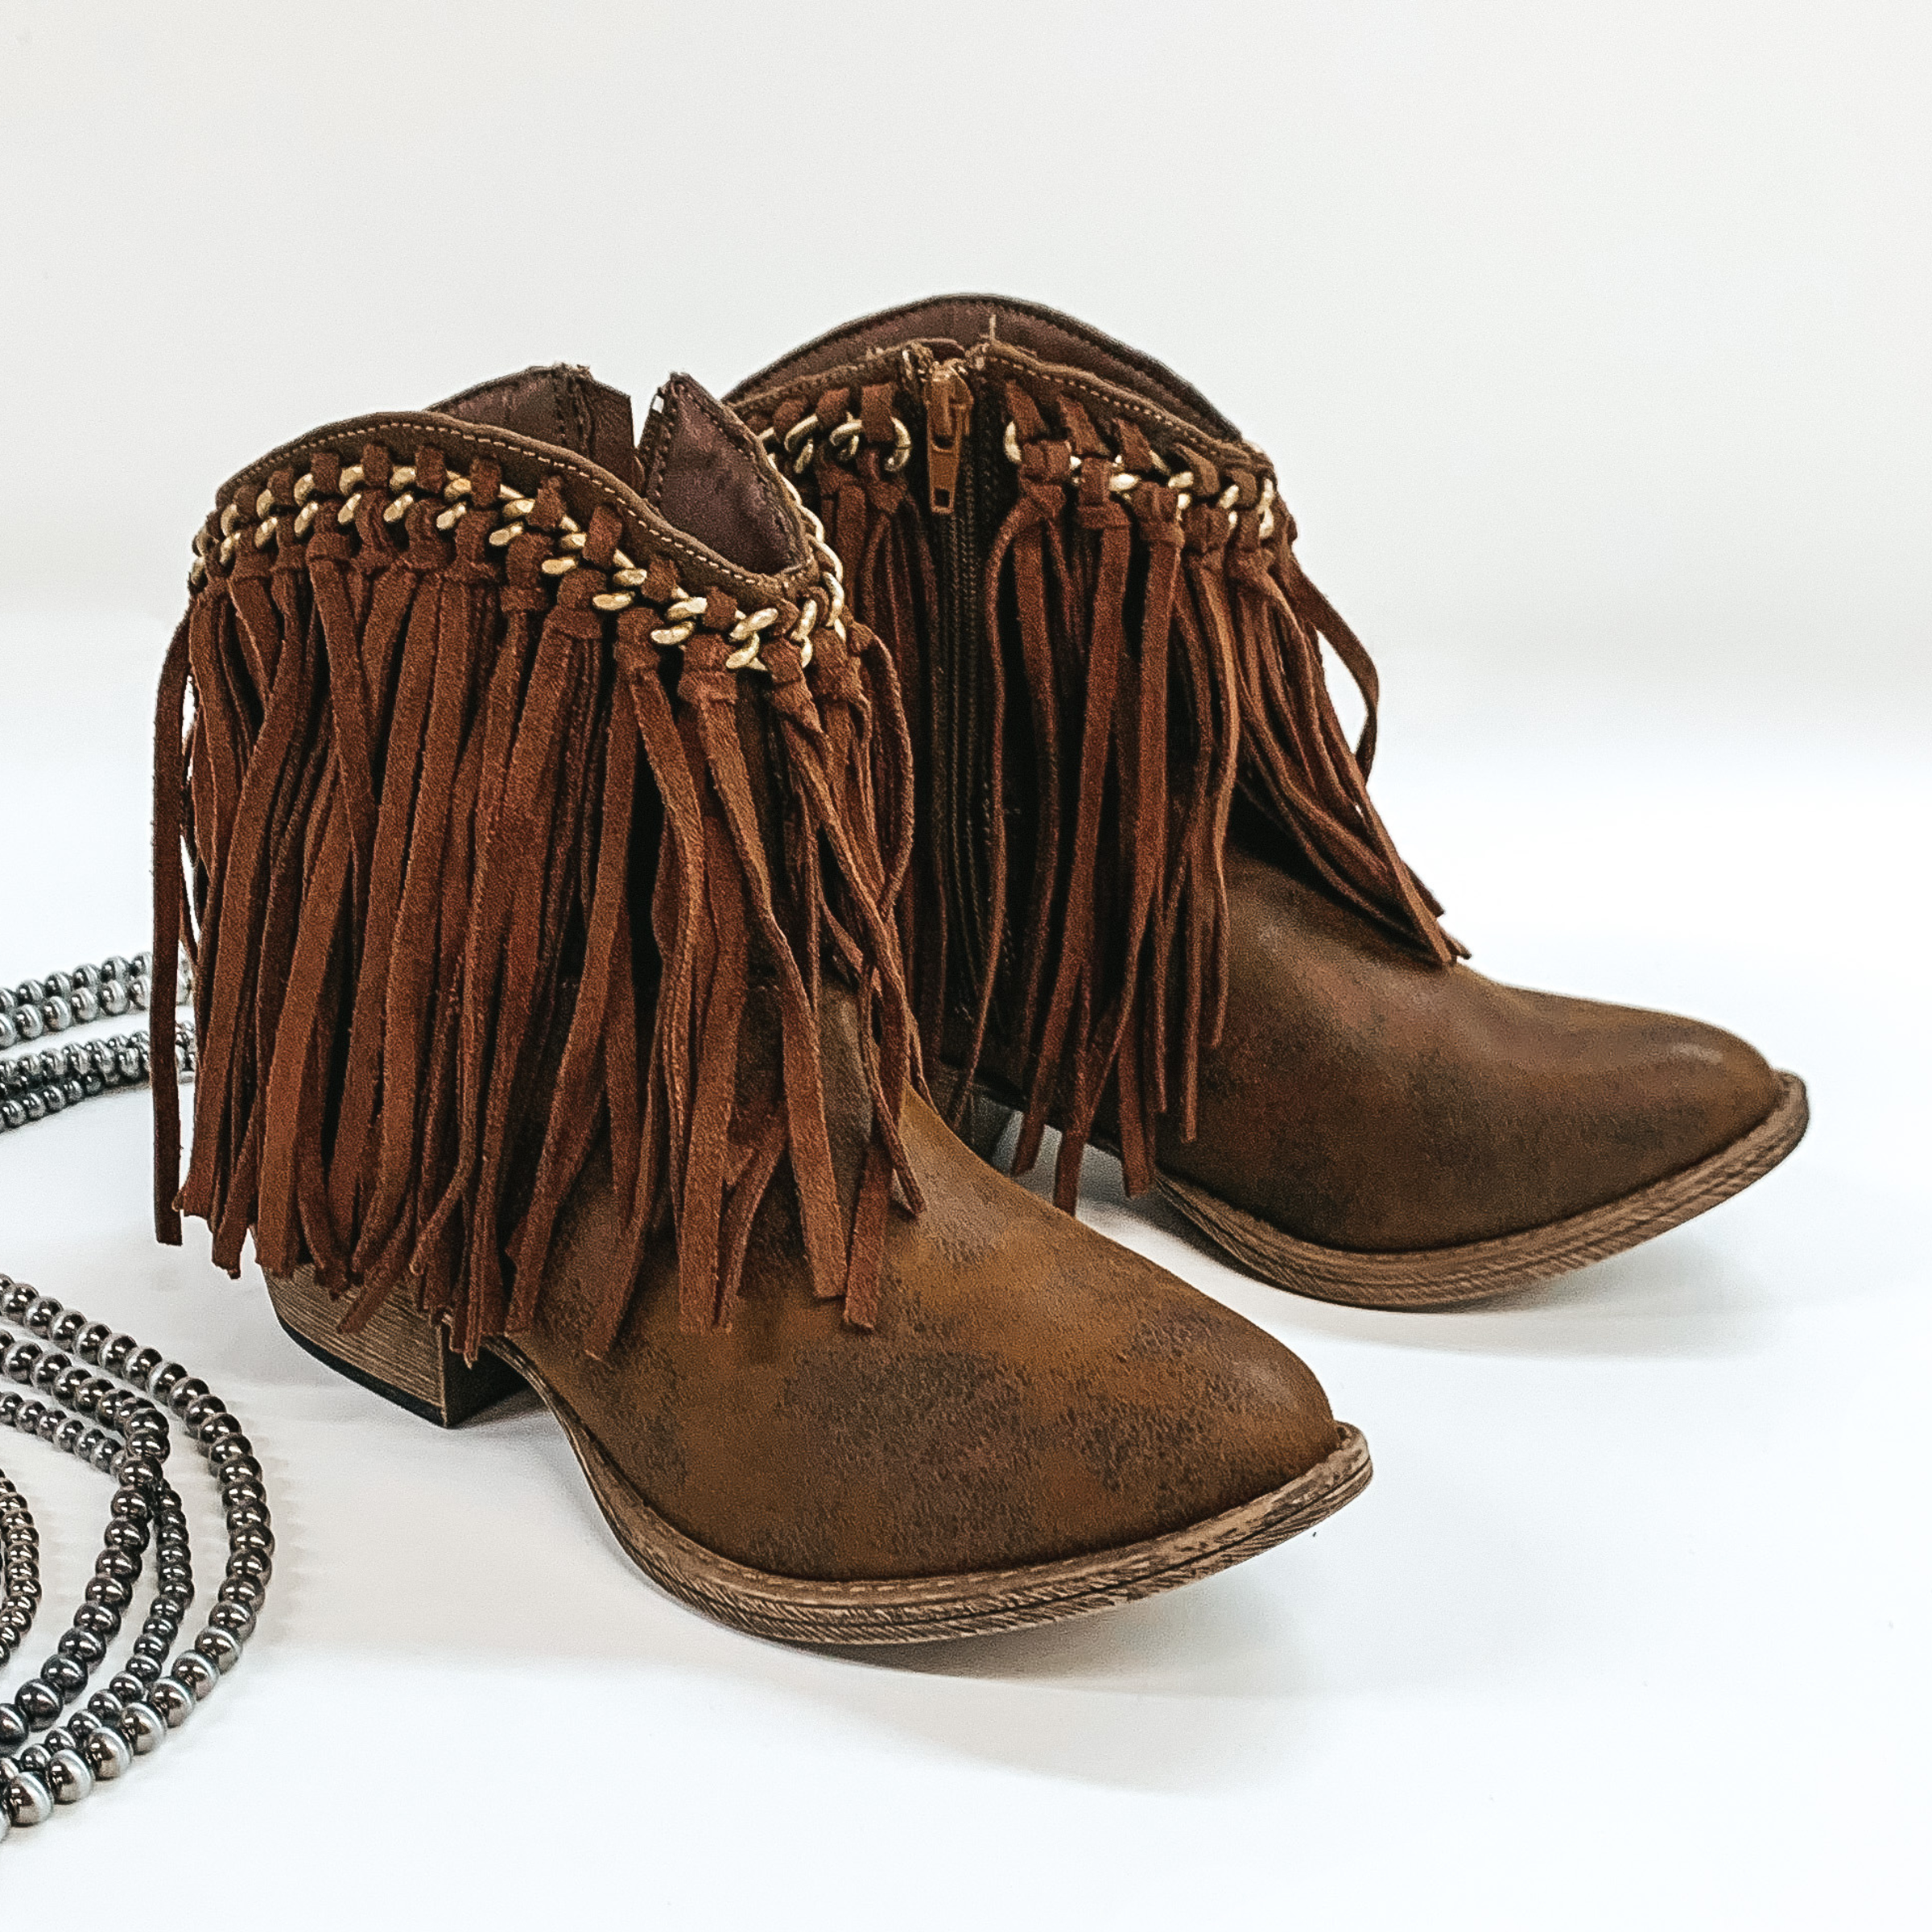 Very G | Rebel Girl Heeled Ankle Booties with Fringe in Brown - Giddy Up Glamour Boutique